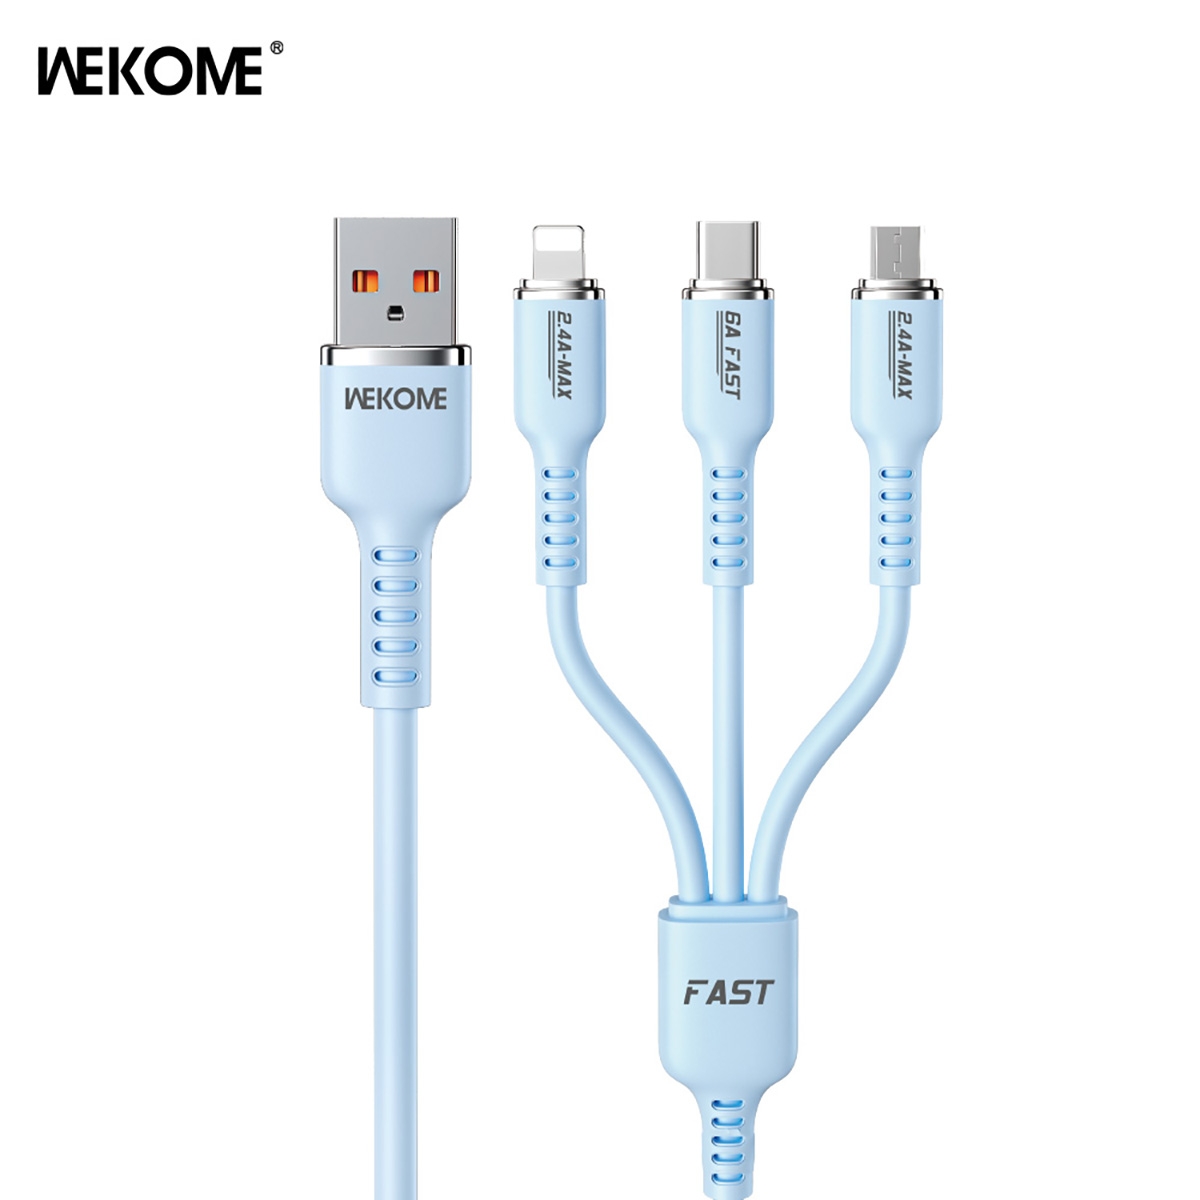 WEKOME Real Silicon 3-in-1 Super Fast Charging Data Cable (66W) - Light Blue